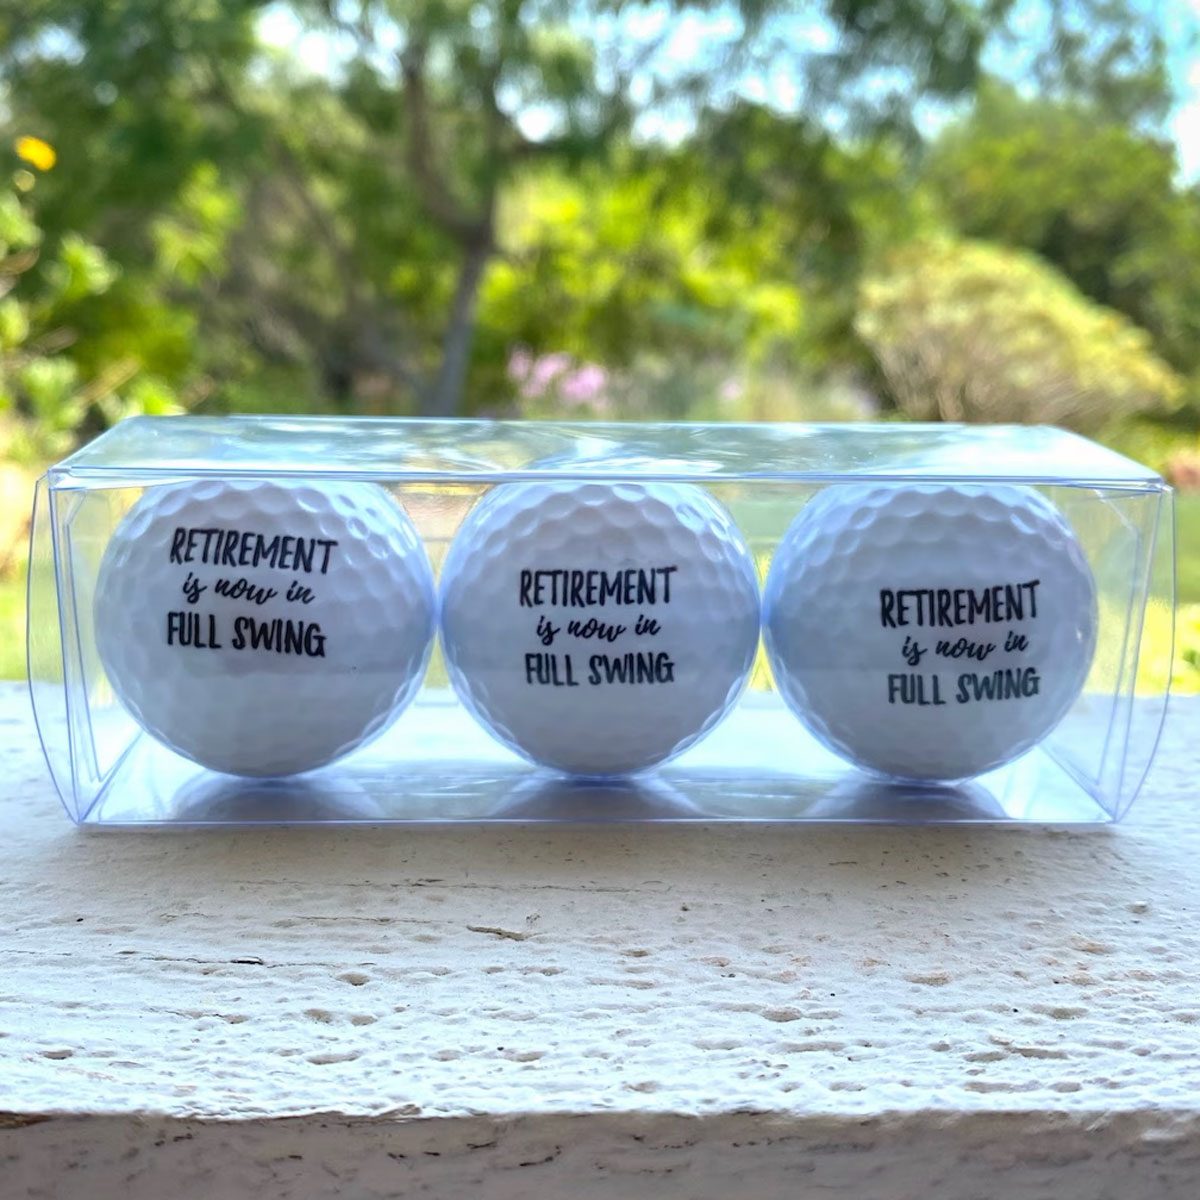 10 Funny Golf Gifts They'll Actually Use